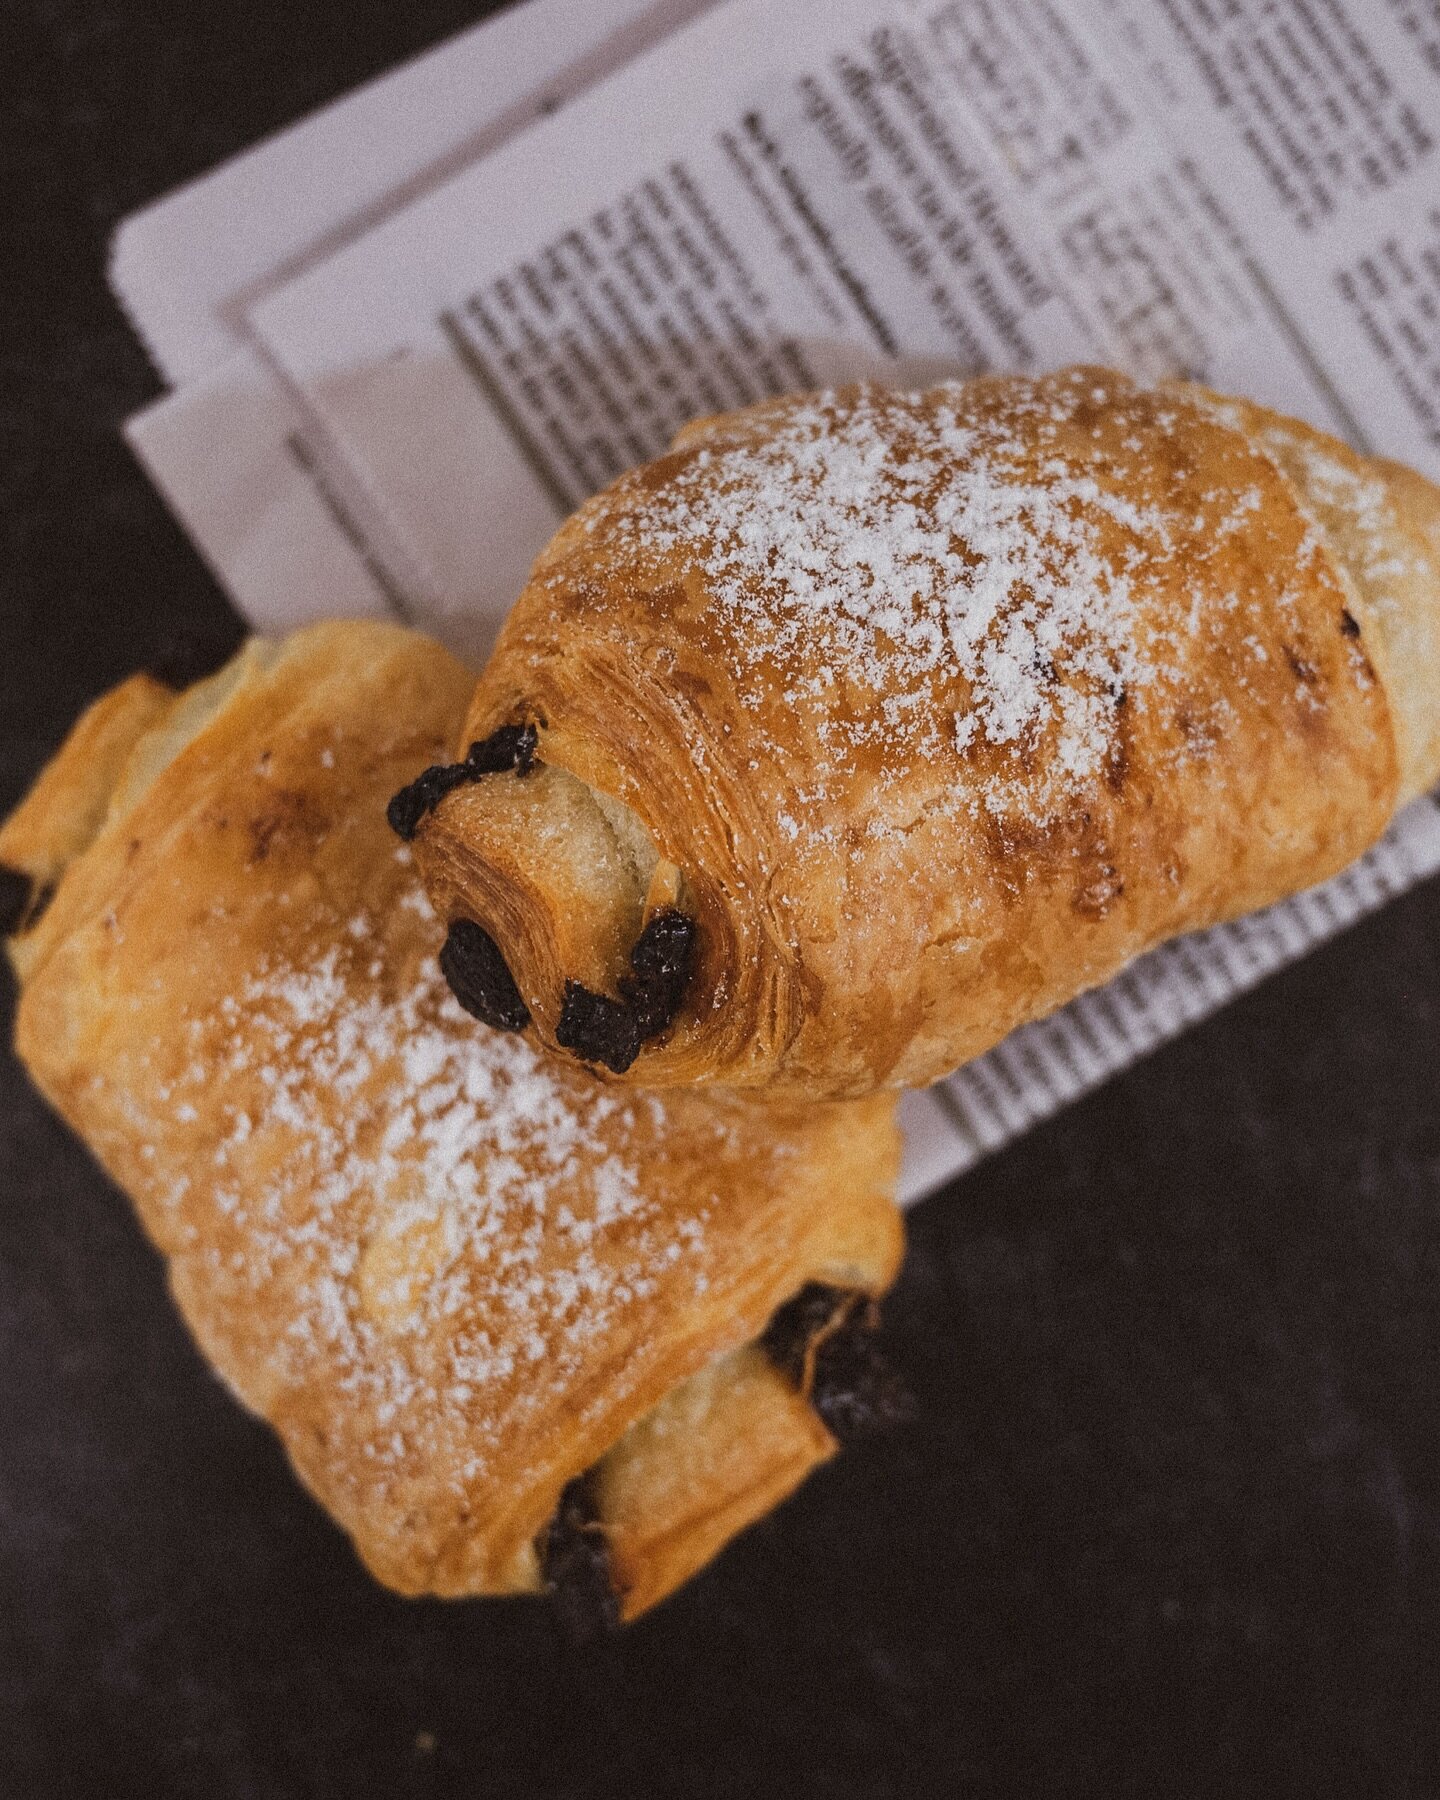 stressed is just &ldquo;desserts&rdquo; spelled backward. so have one of our NEW chocolate croissants!